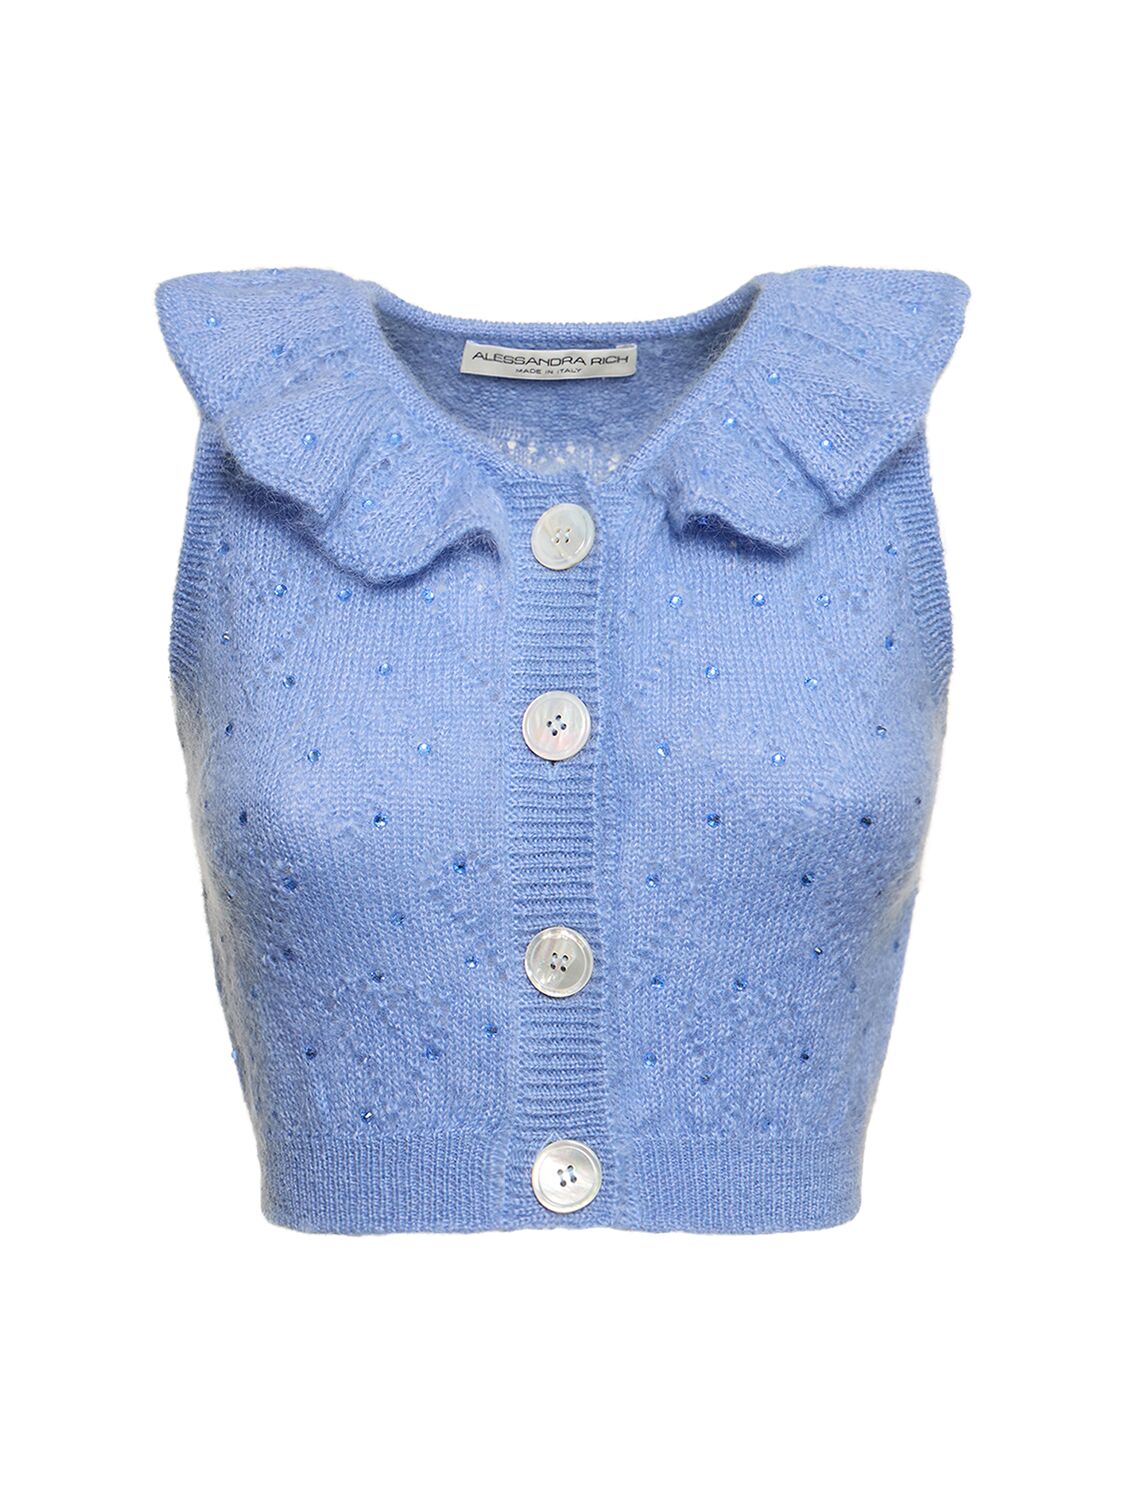 Alessandra Rich Mohair Knit Cropped Waistcoat Top W/ Studs In Light Blue